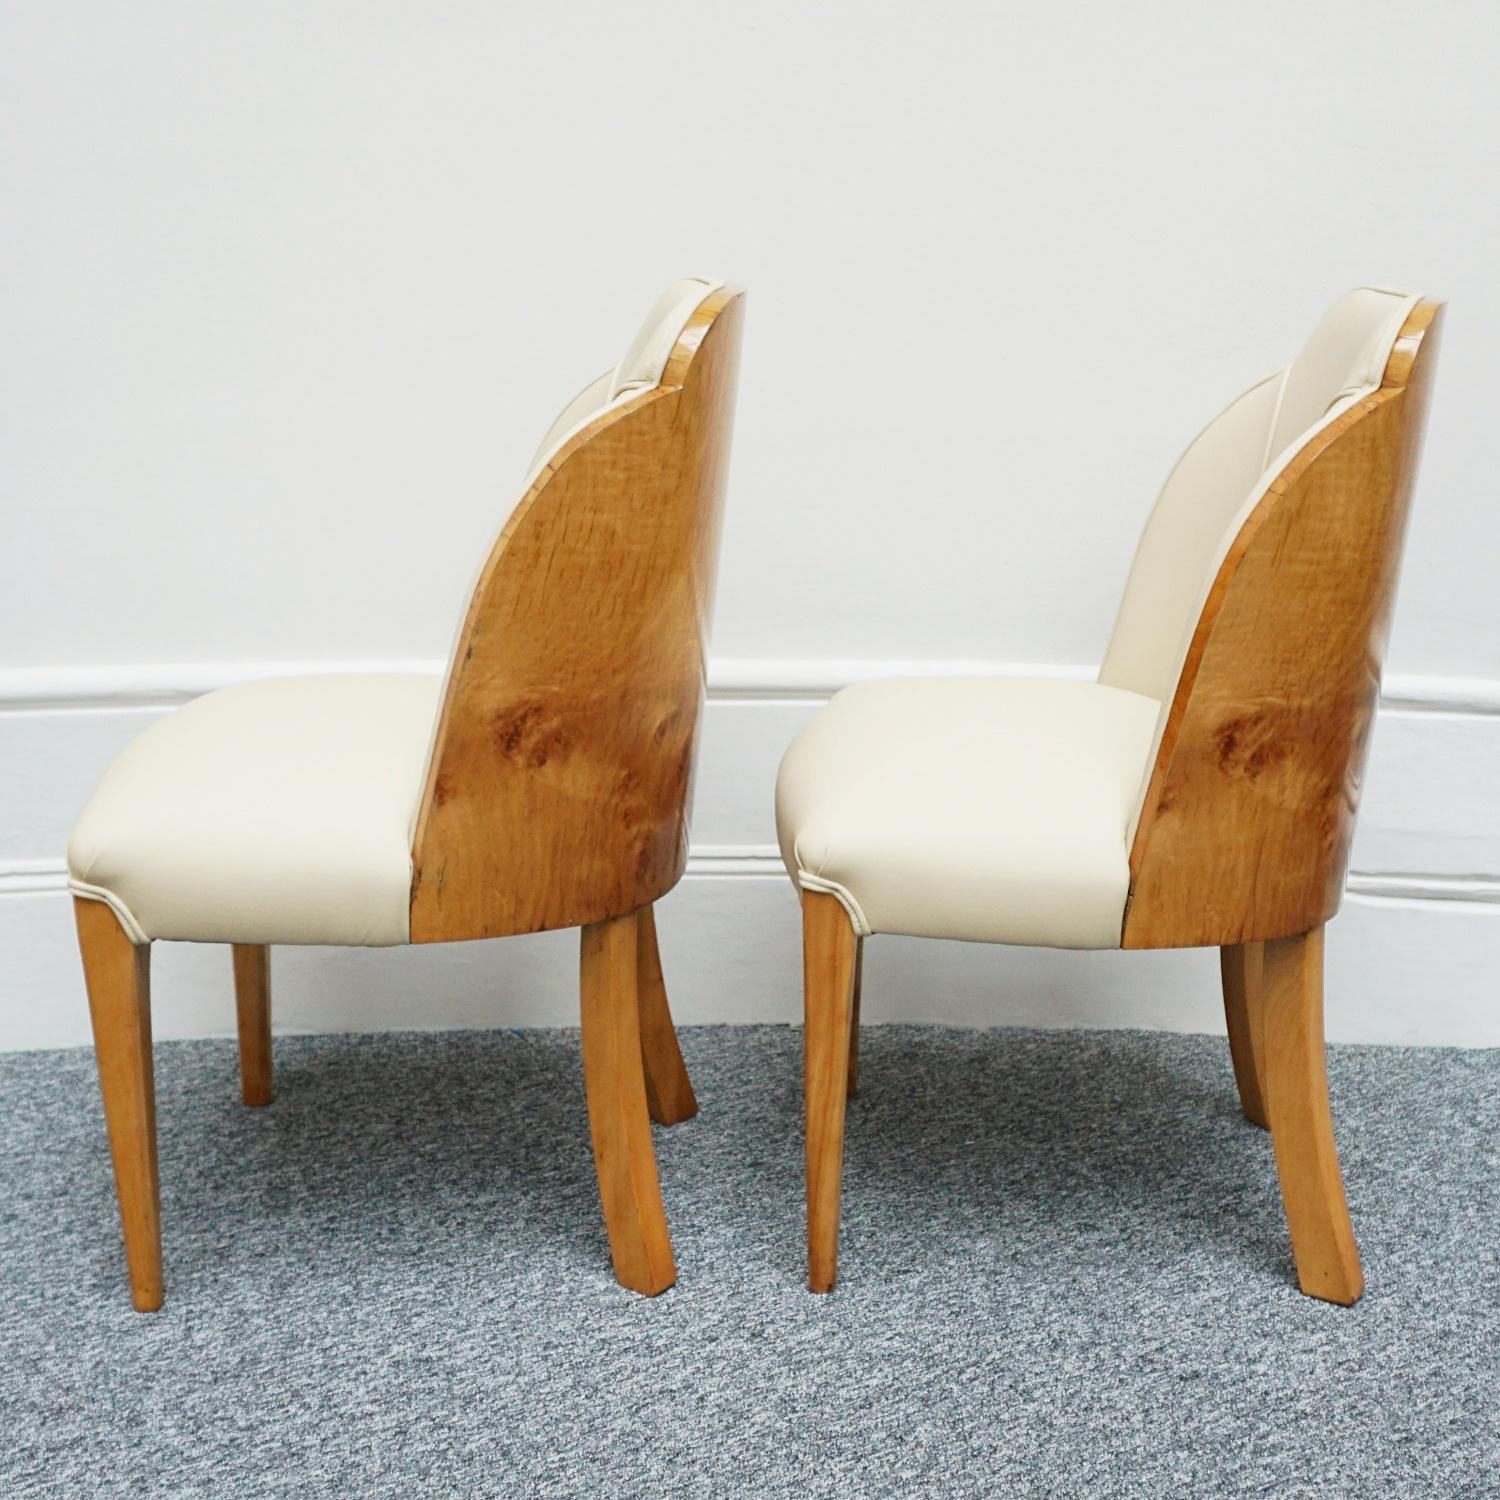 Original Pair of Art Deco 1930's Walnut and Cream Leather Side Chairs 1